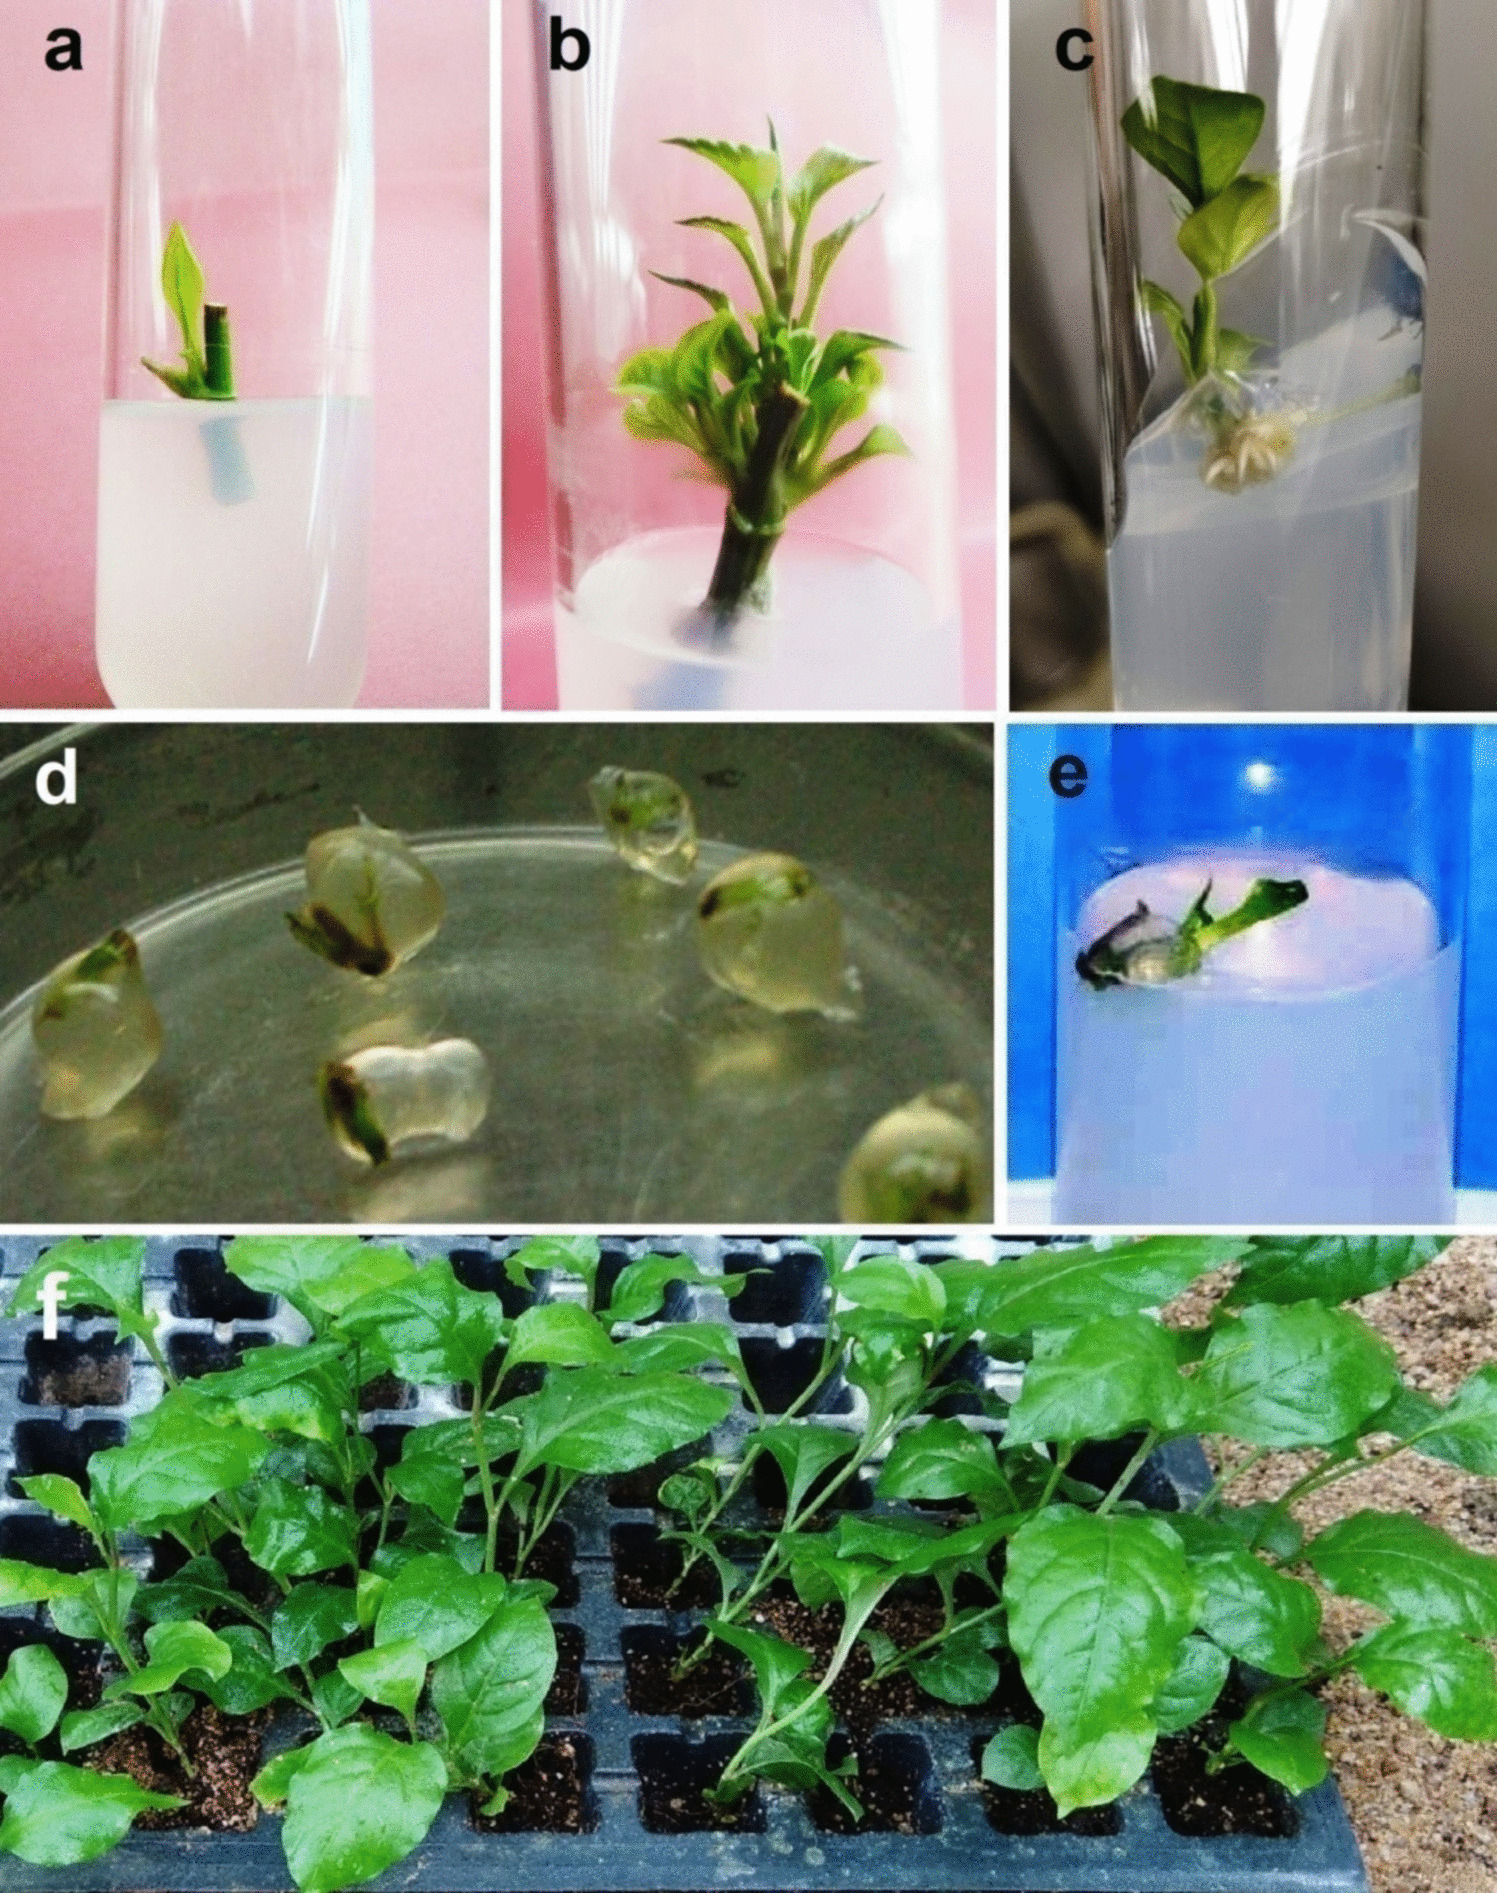 Low-temperature storage in dark condition improved the in vitro regeneration of Plumbago zeylanica synthetic seeds: a medicinally valuable species